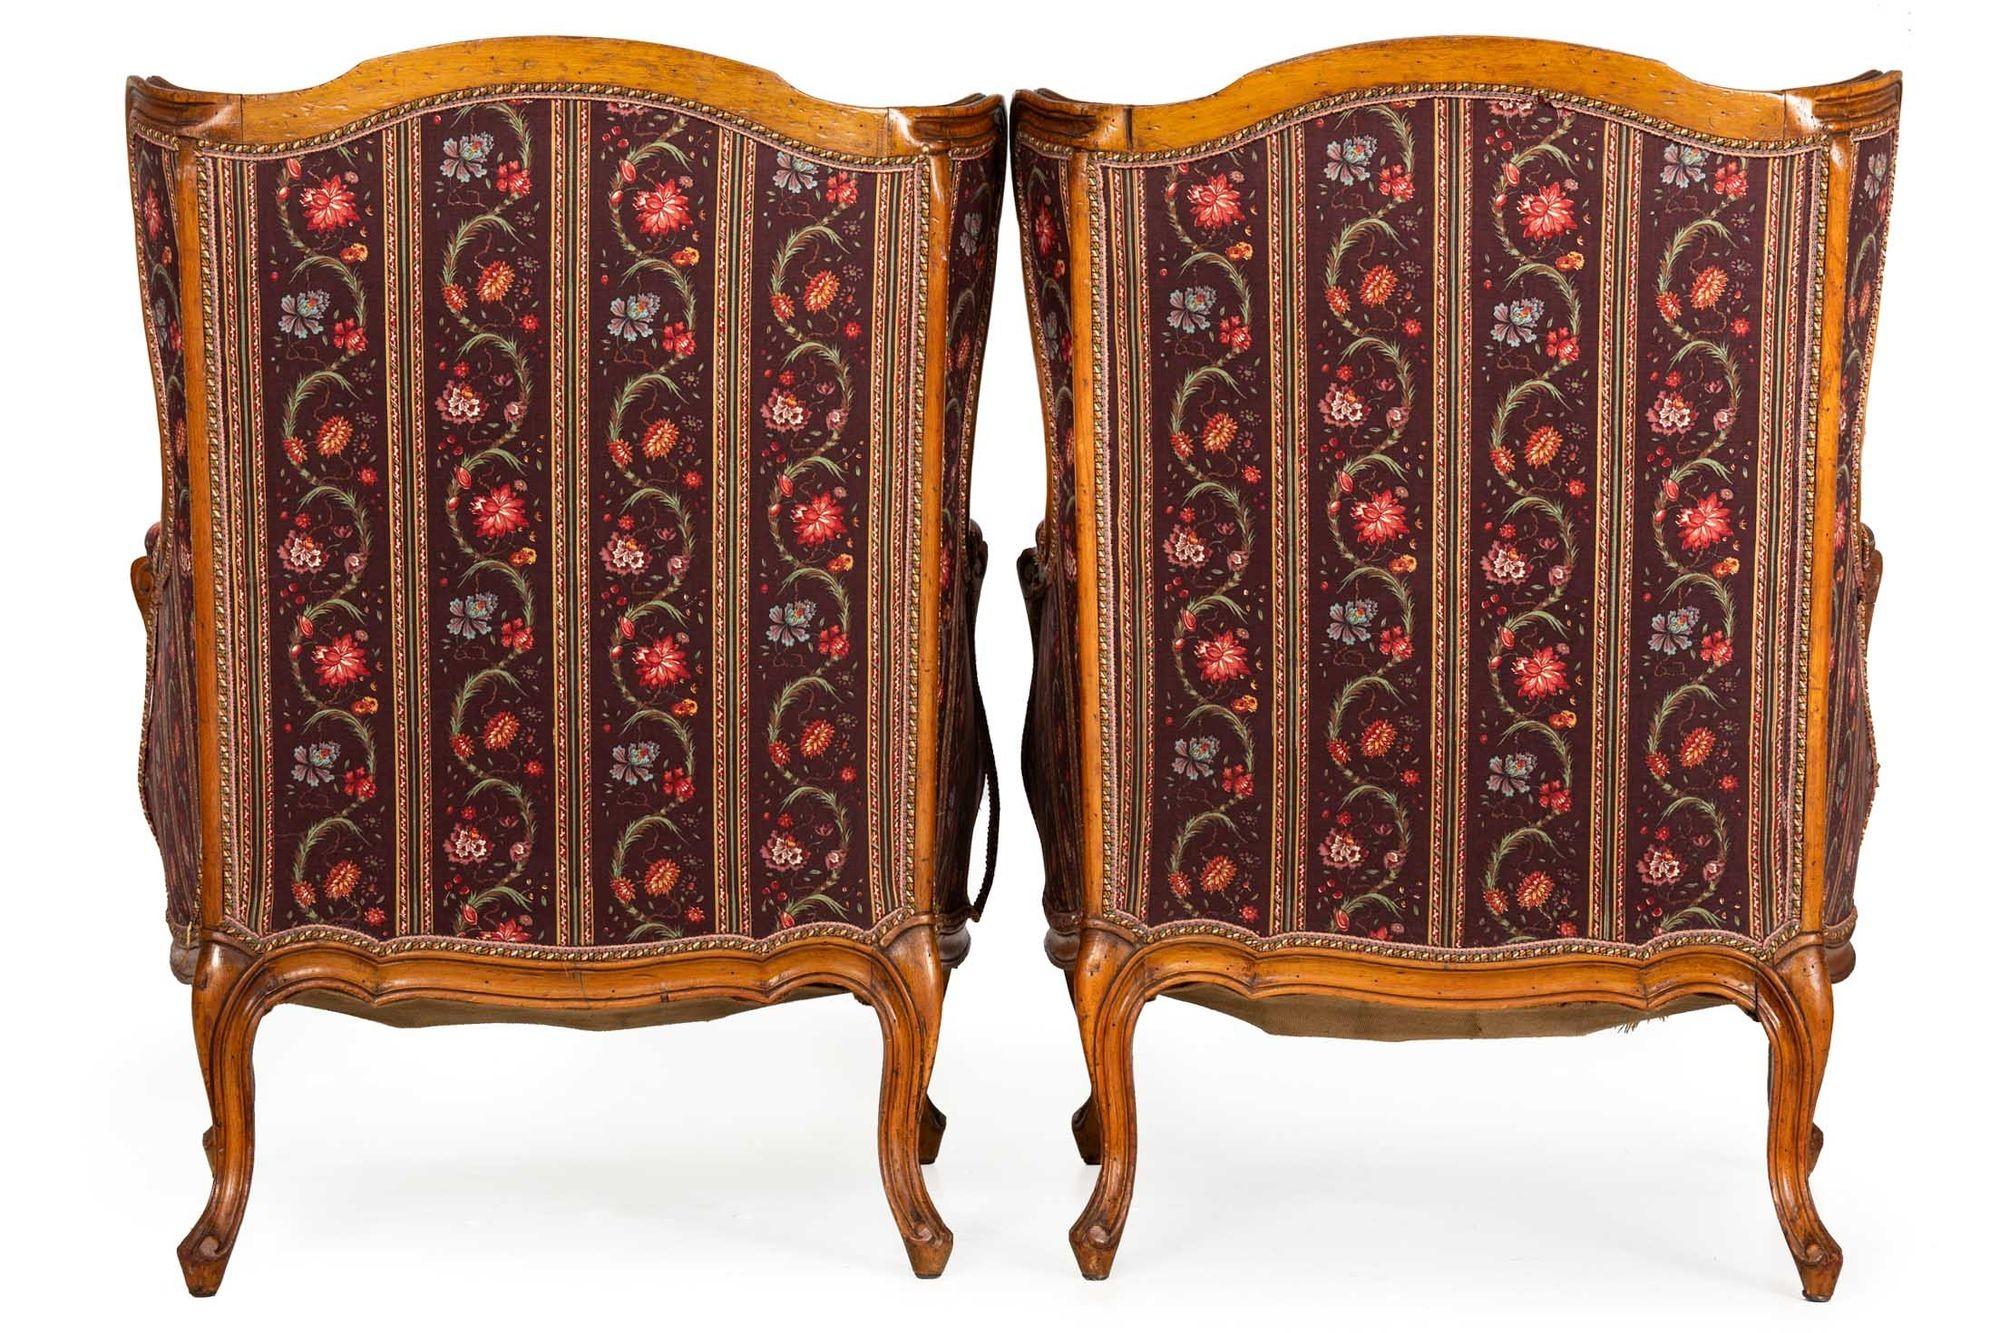 Antique 19th Century Pair of French Patinated Beechwood Arm Chairs In Good Condition For Sale In Shippensburg, PA